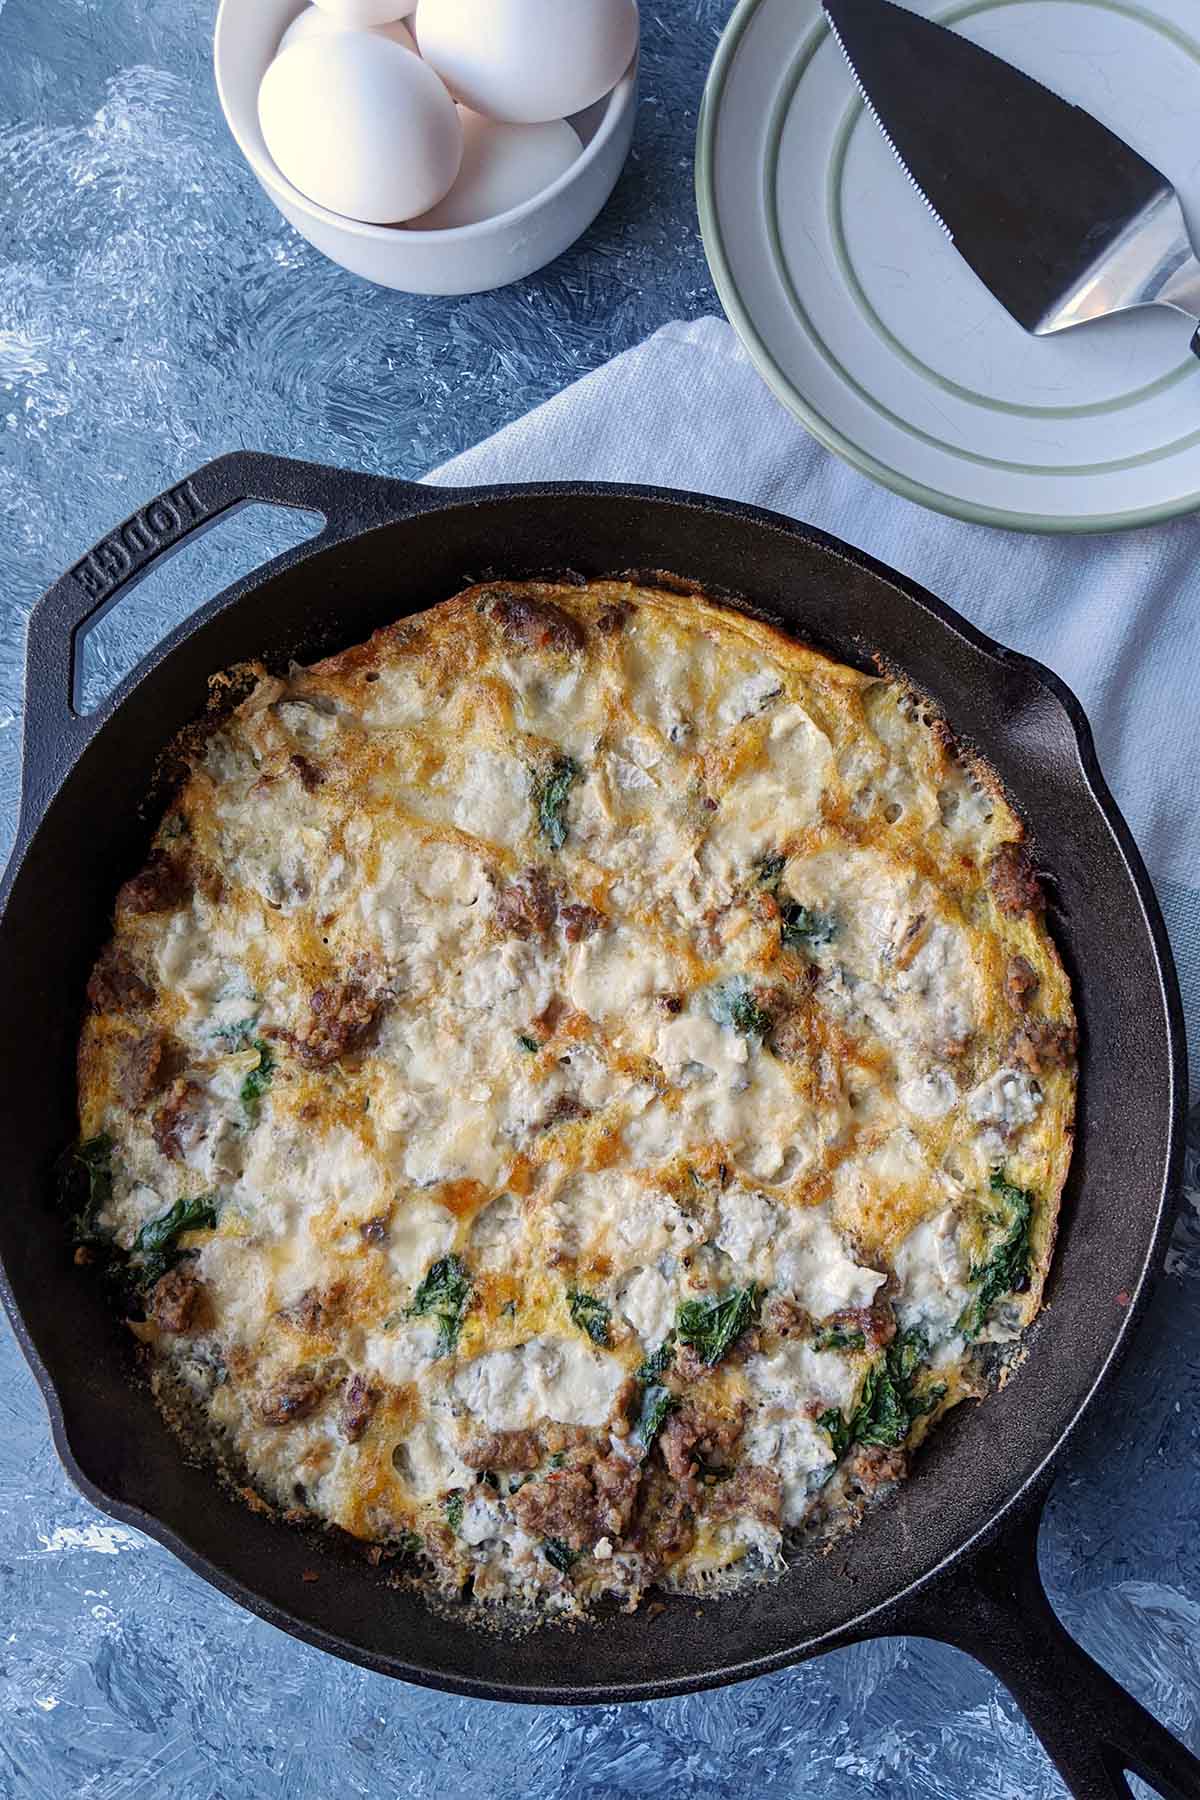 kale and sausage egg frittata in a cast iron skillet.